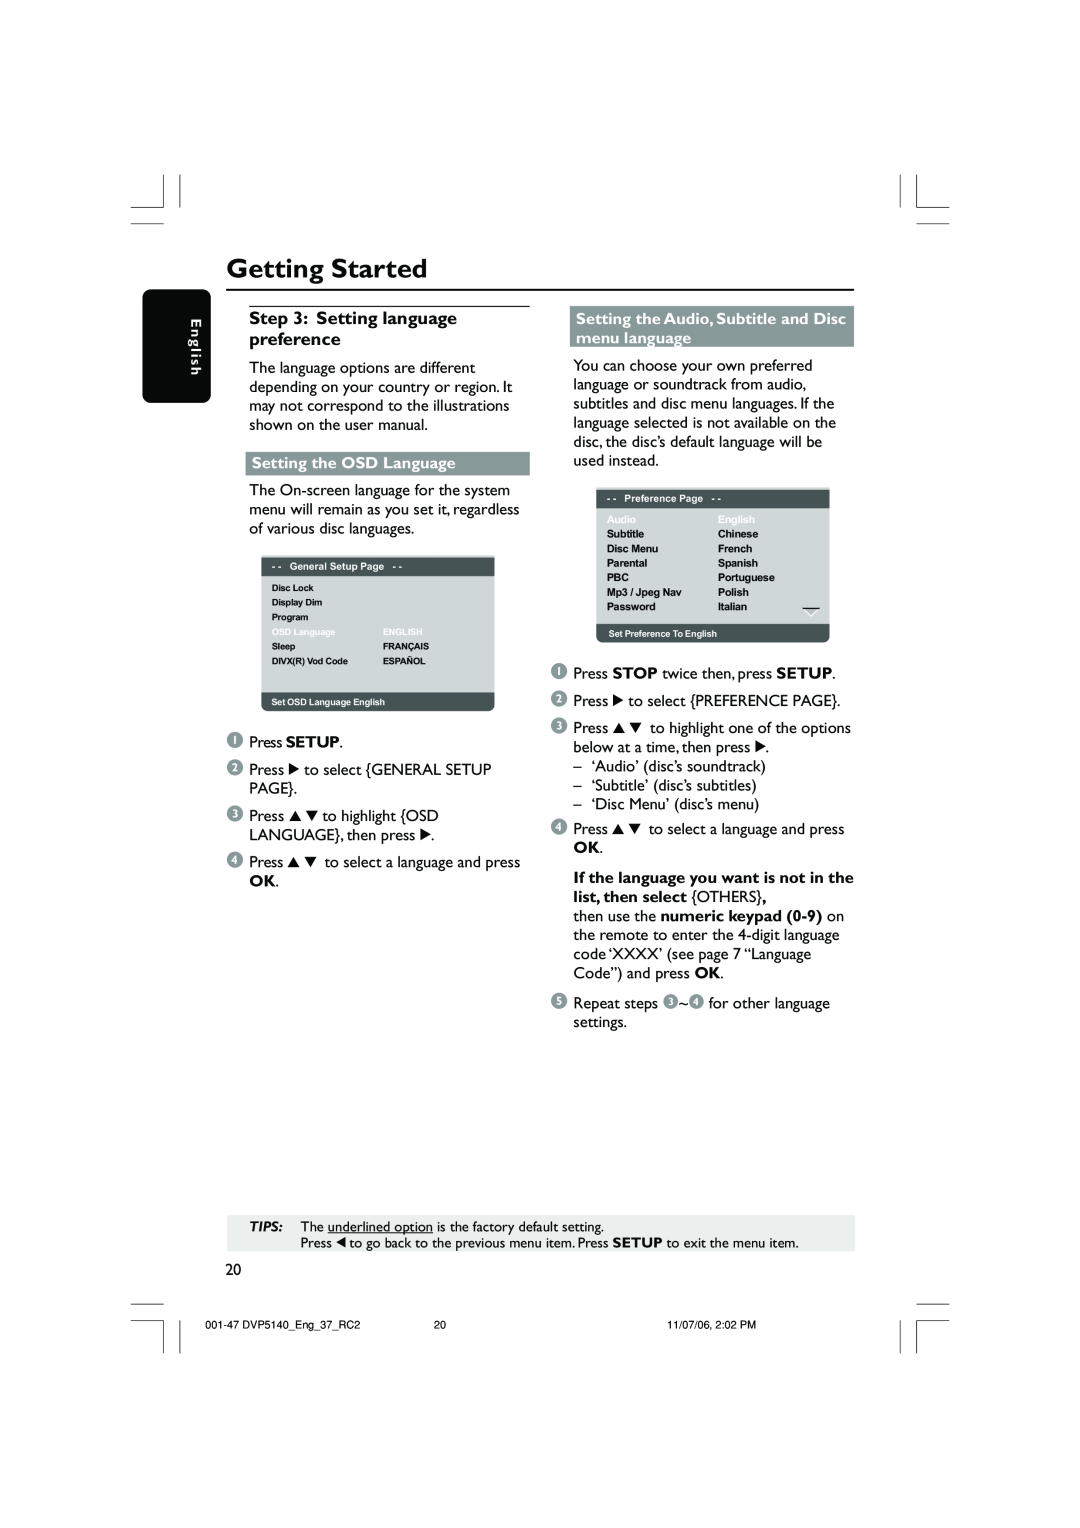 Philips DVP5140 user manual Setting language preference, Getting Started, Setting the OSD Language, E n g l i s h 